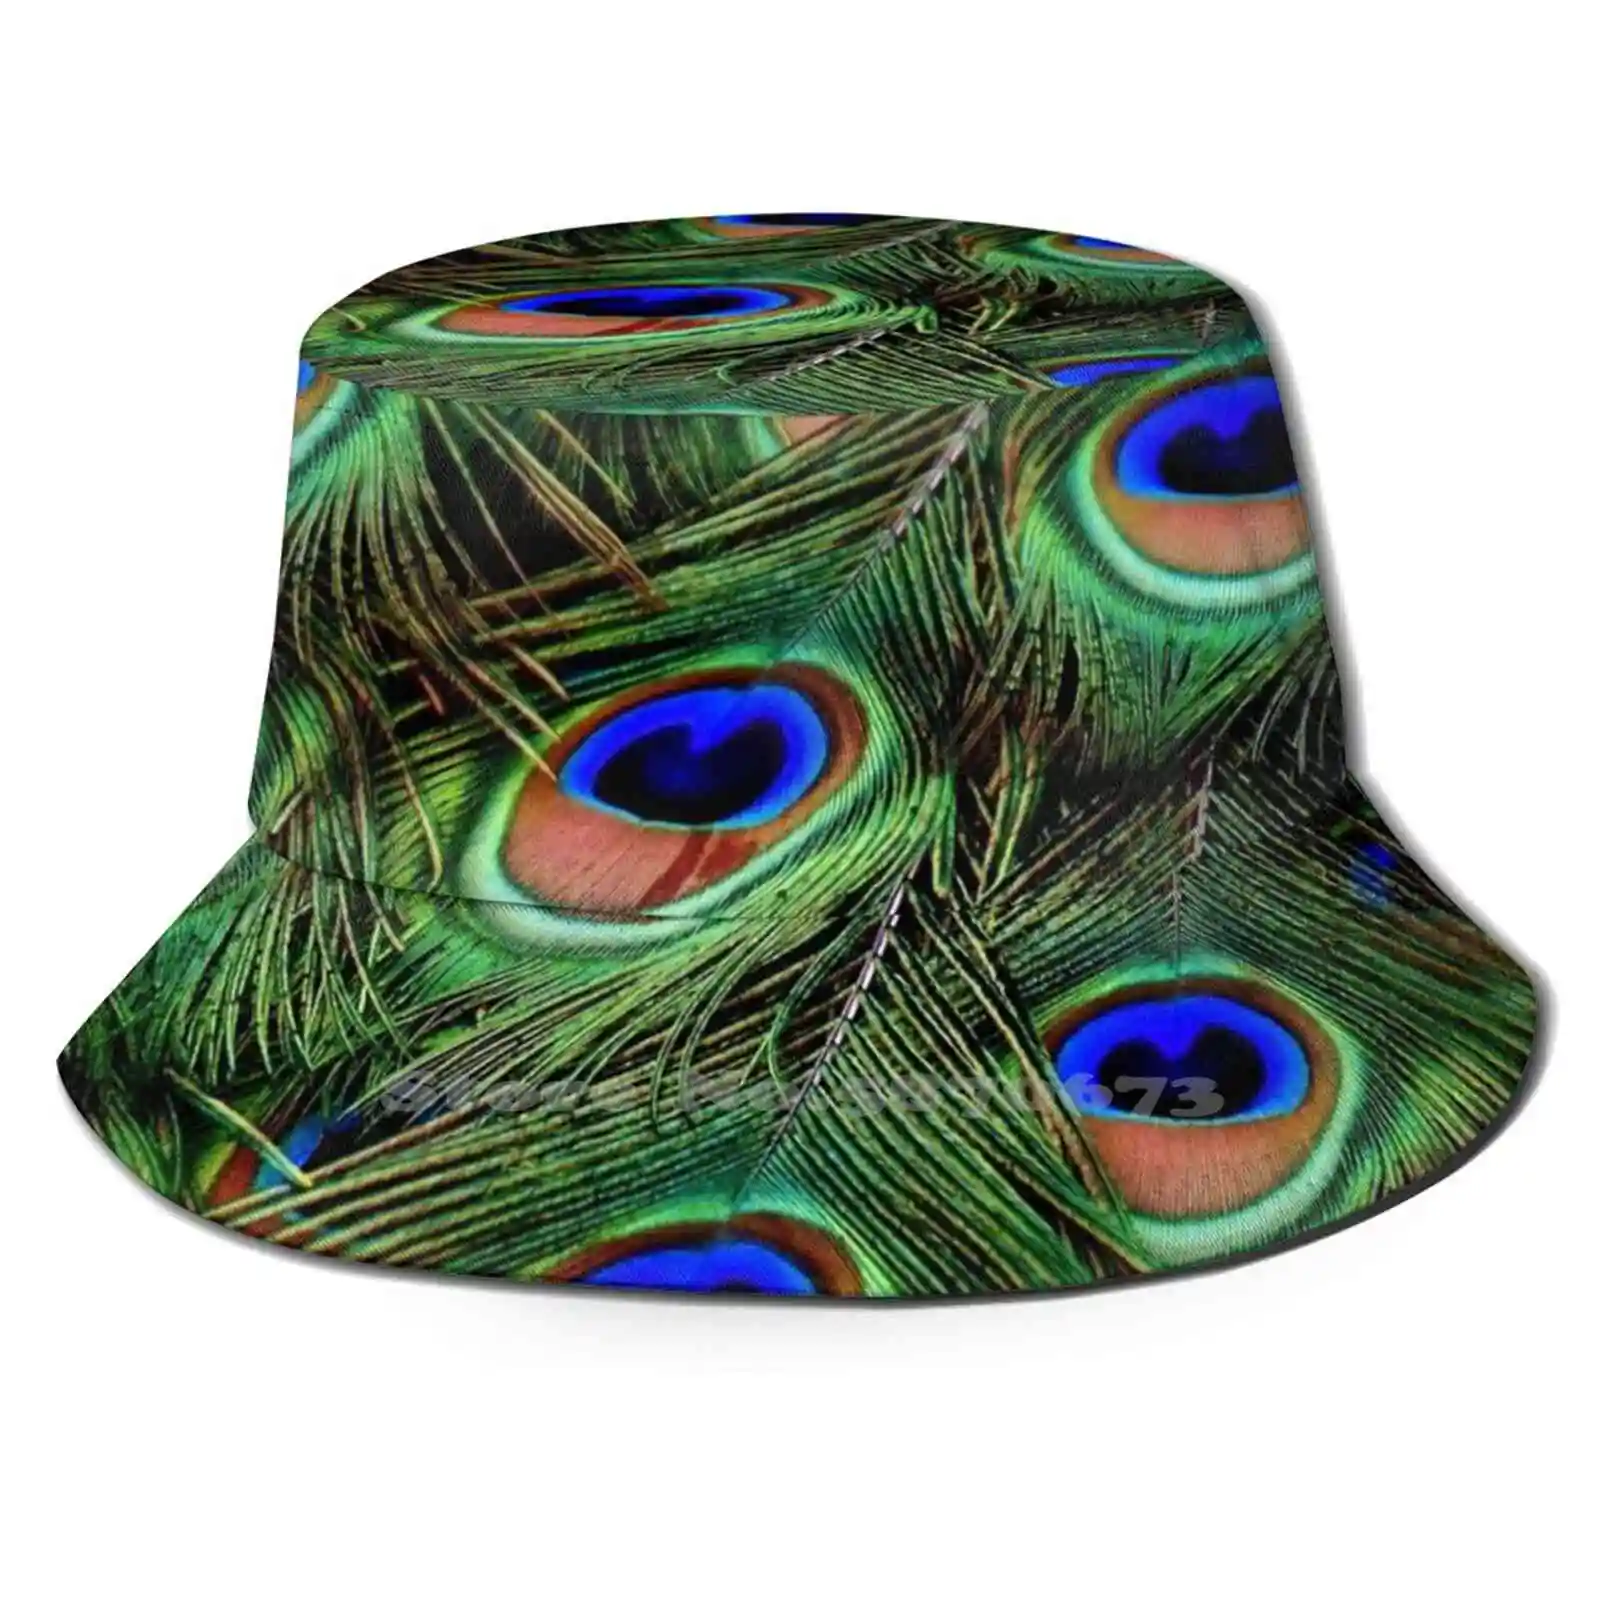 

Iridescent , Colorful Peacock Feather Plumage Design Fishing Hunting Climbing Cap Fisherman Hats Peacock Feathers Plumage